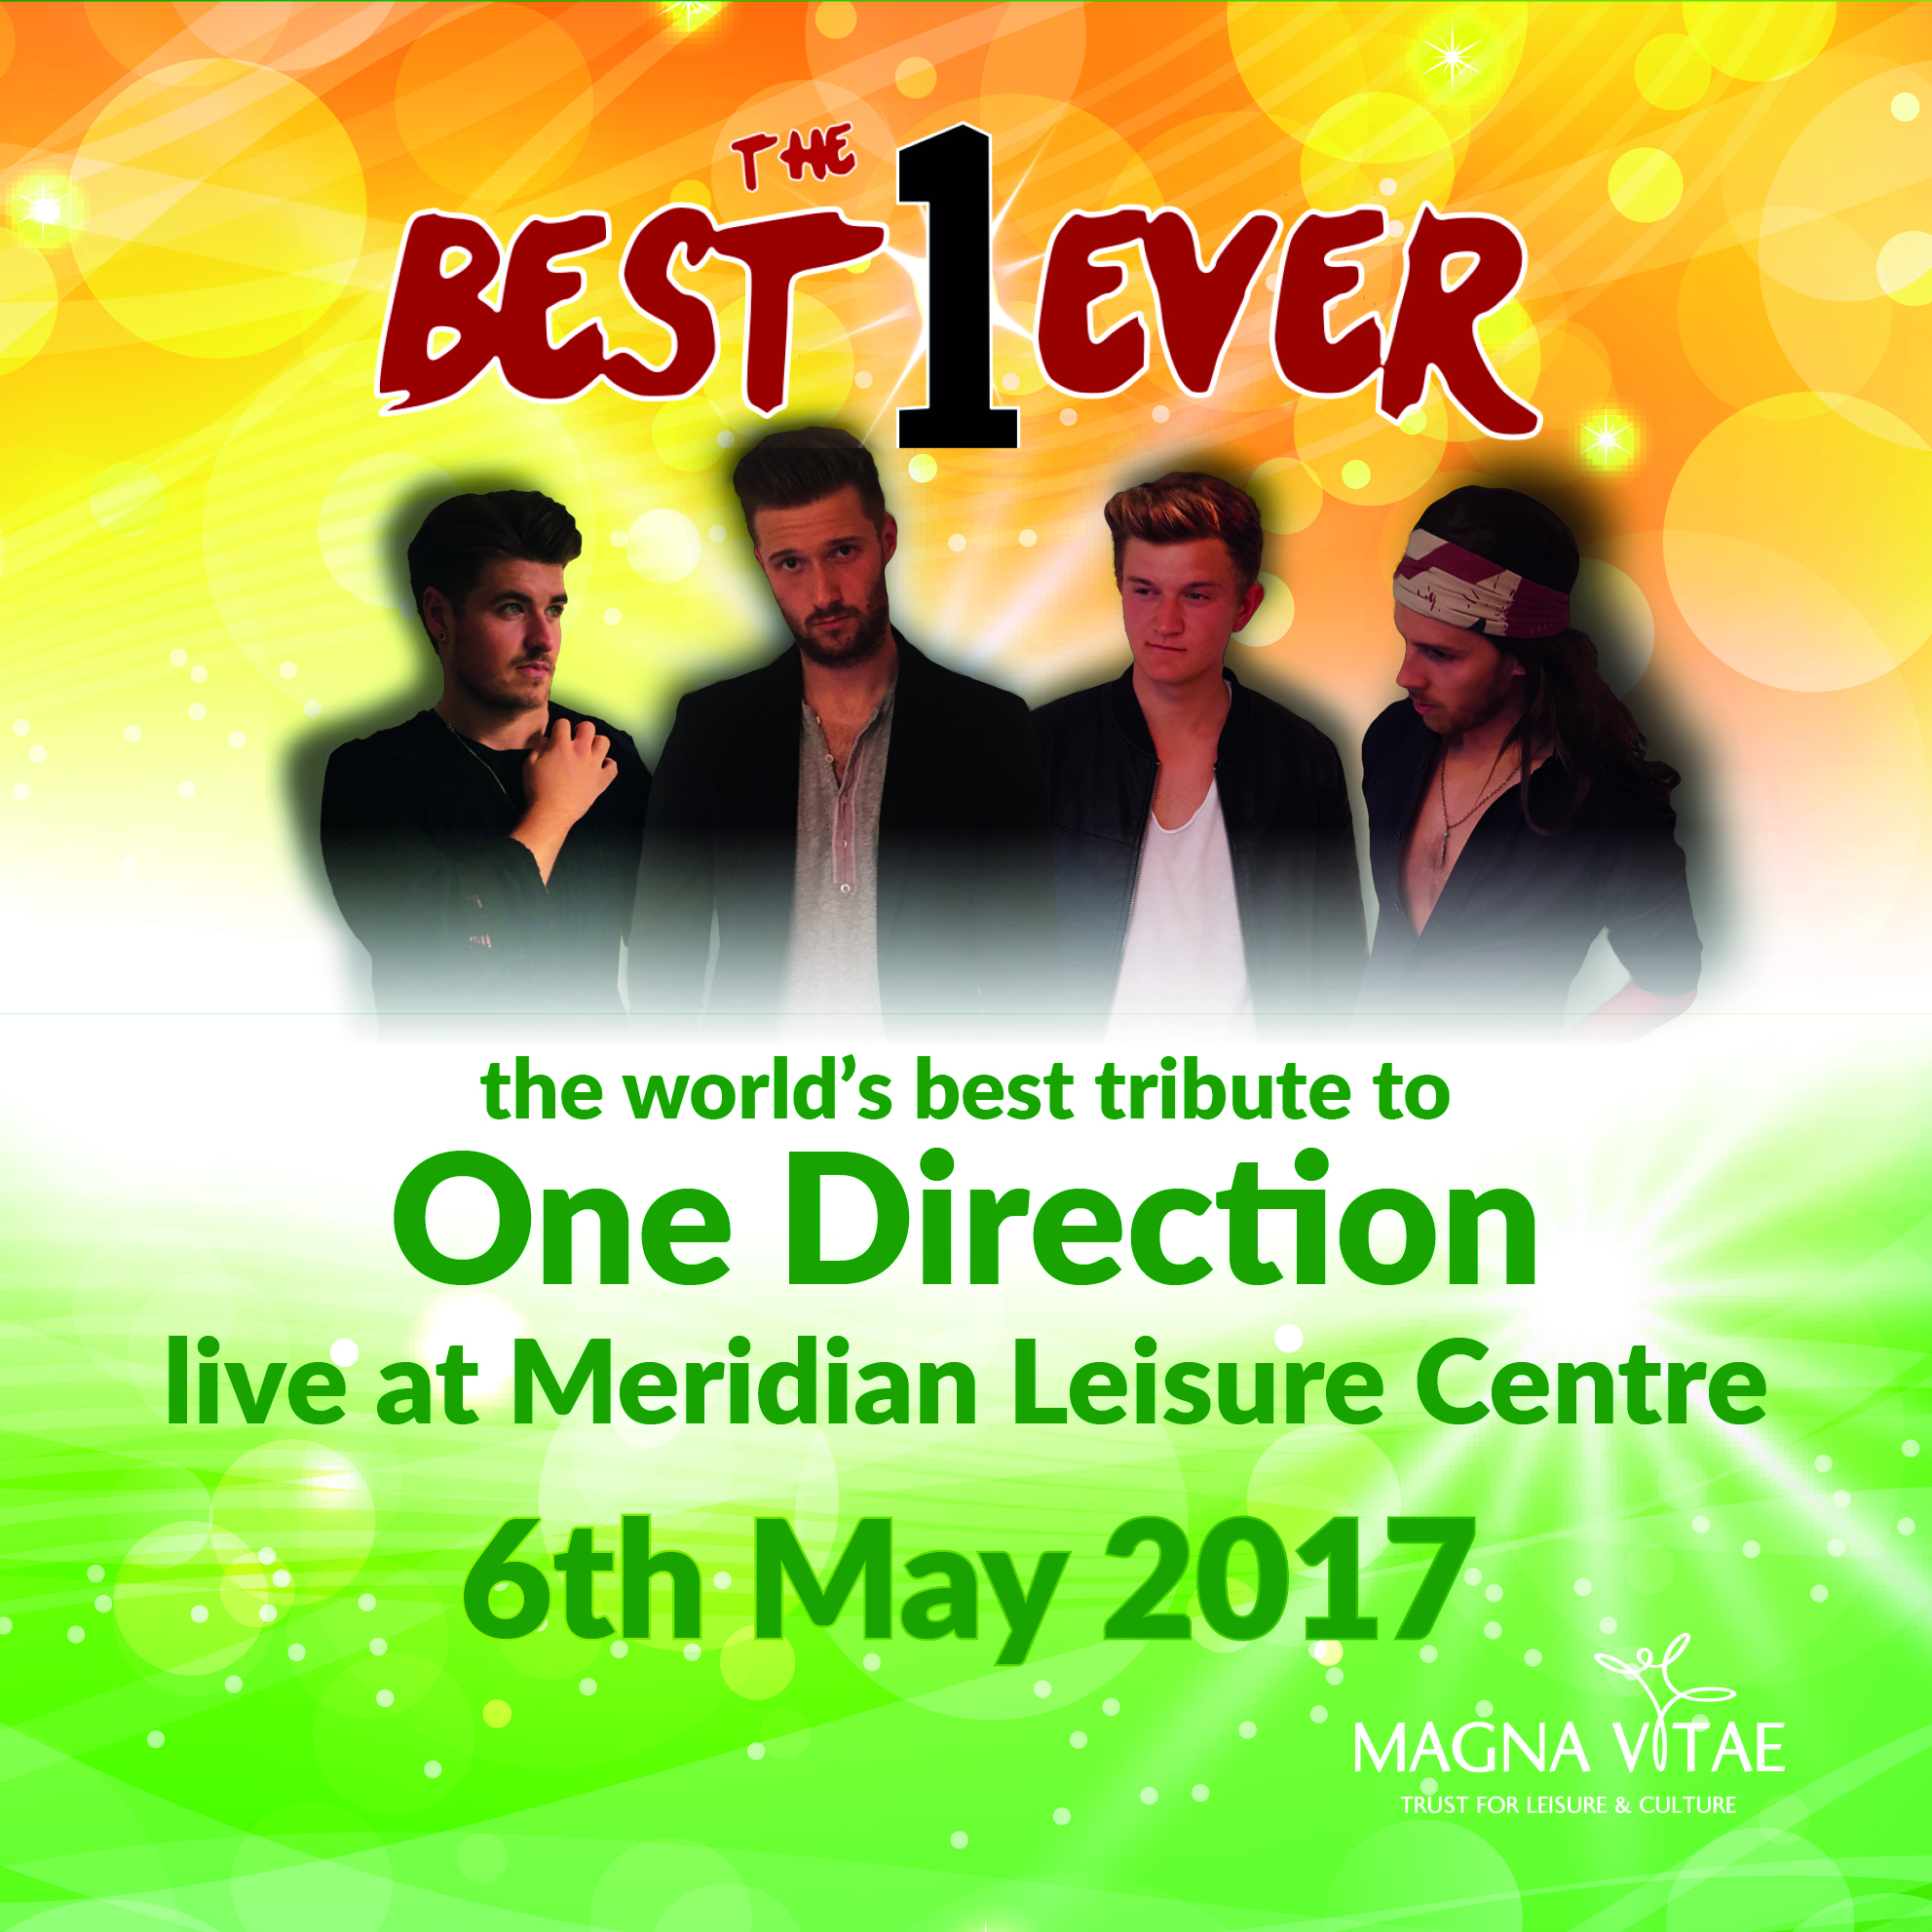 The Best 1 Ever Slider, One Direction Tribute, Louth, Lincolnshire, Meridian Leisure Centre, Event, Concert